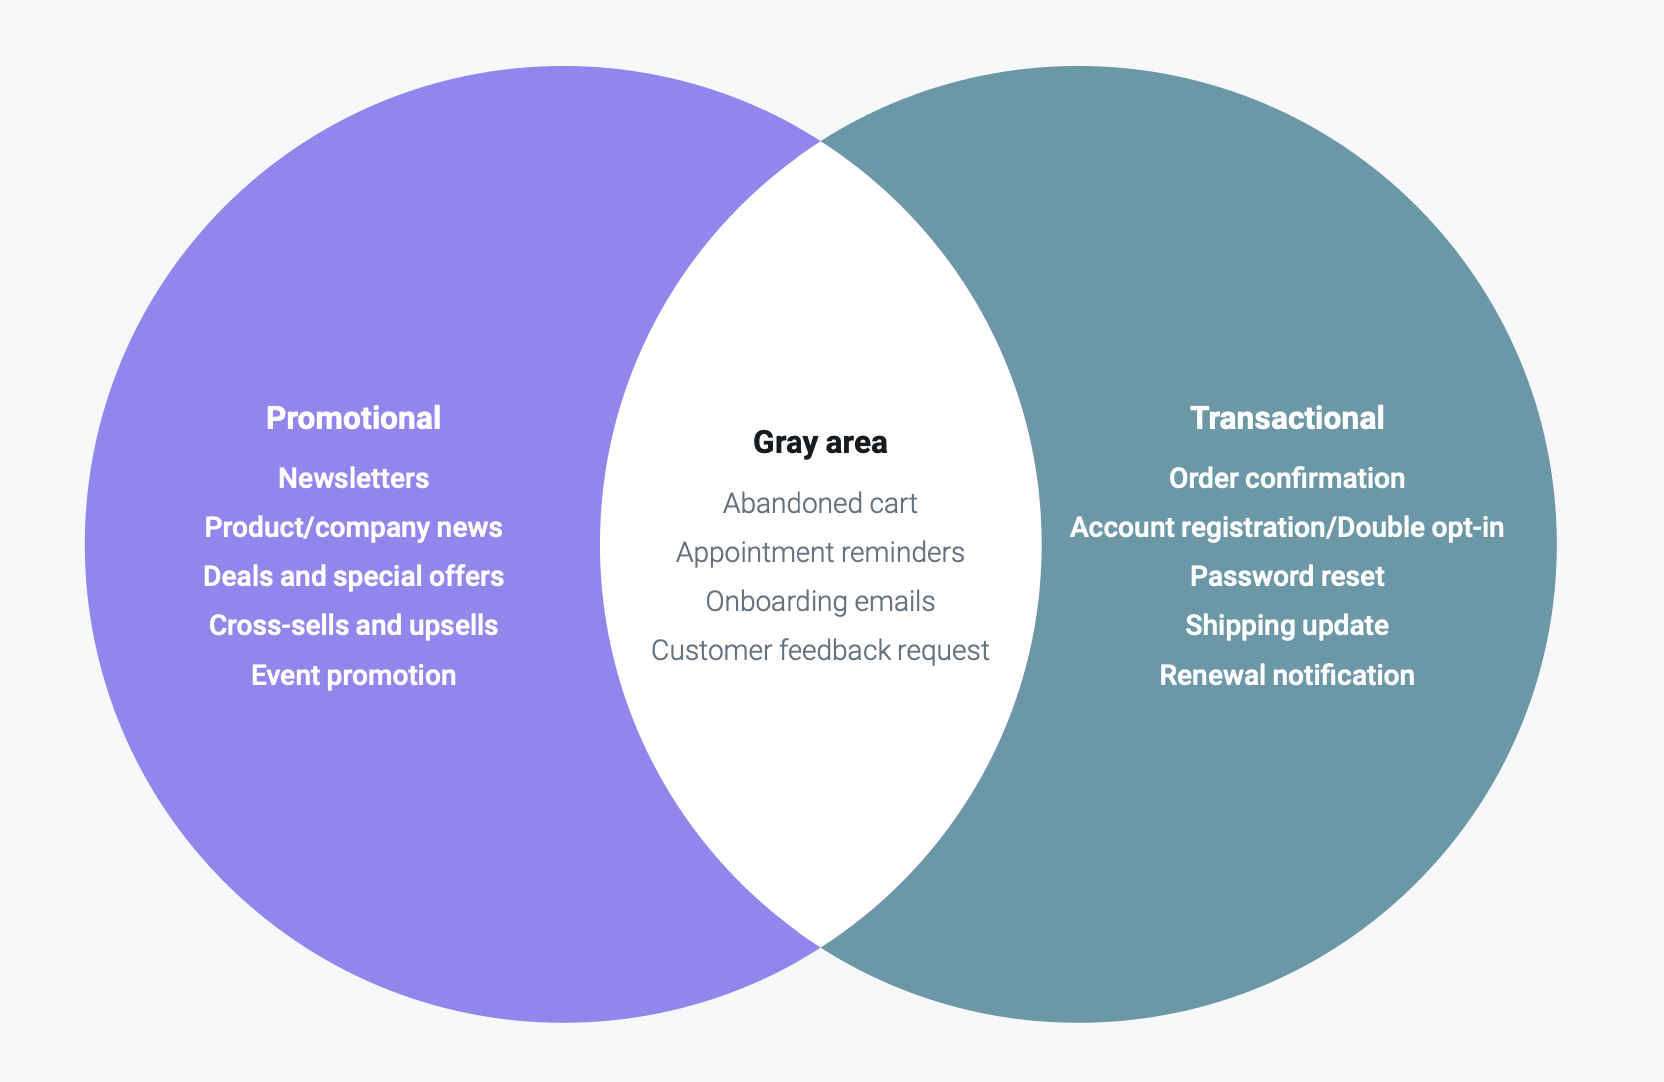 A graph showing the key differences between transactional email and marketing email